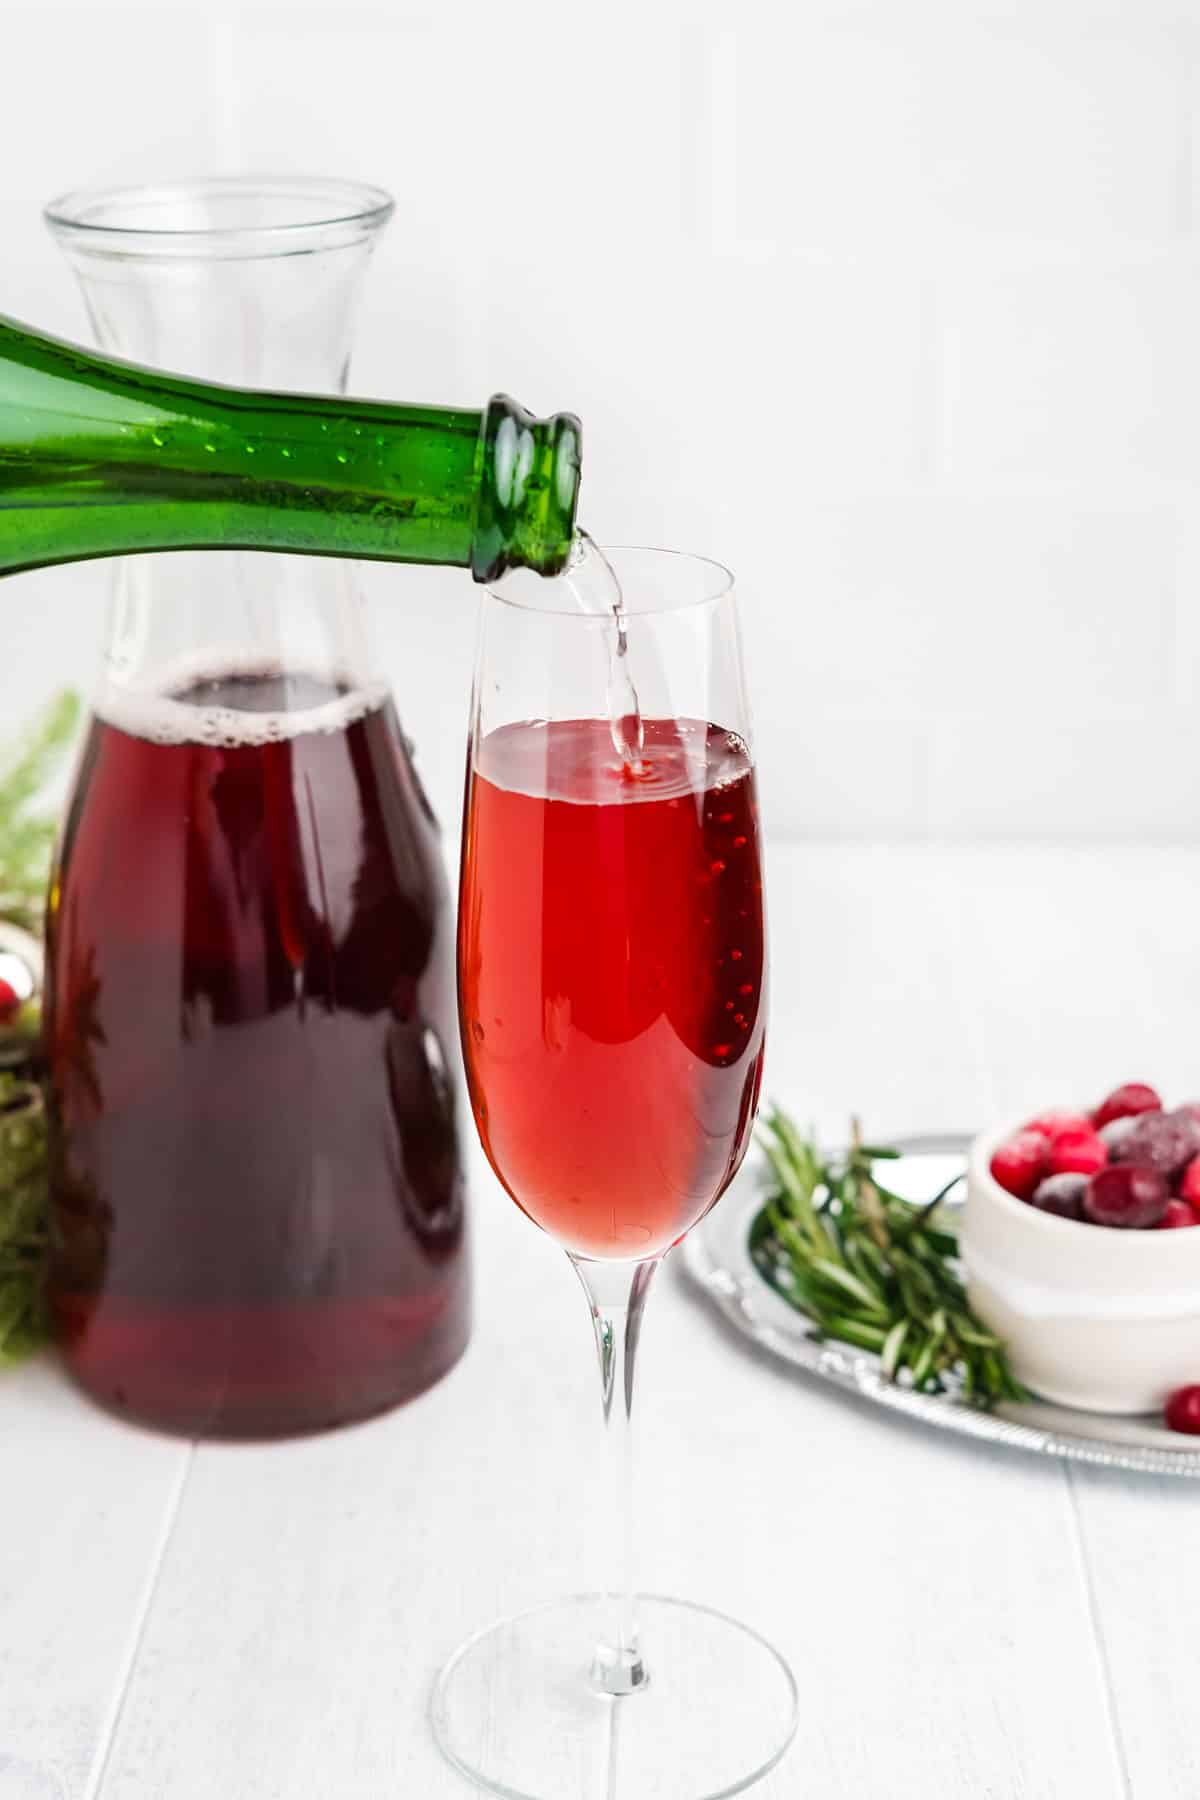 Adding the champagne on top of the cranberry juice.